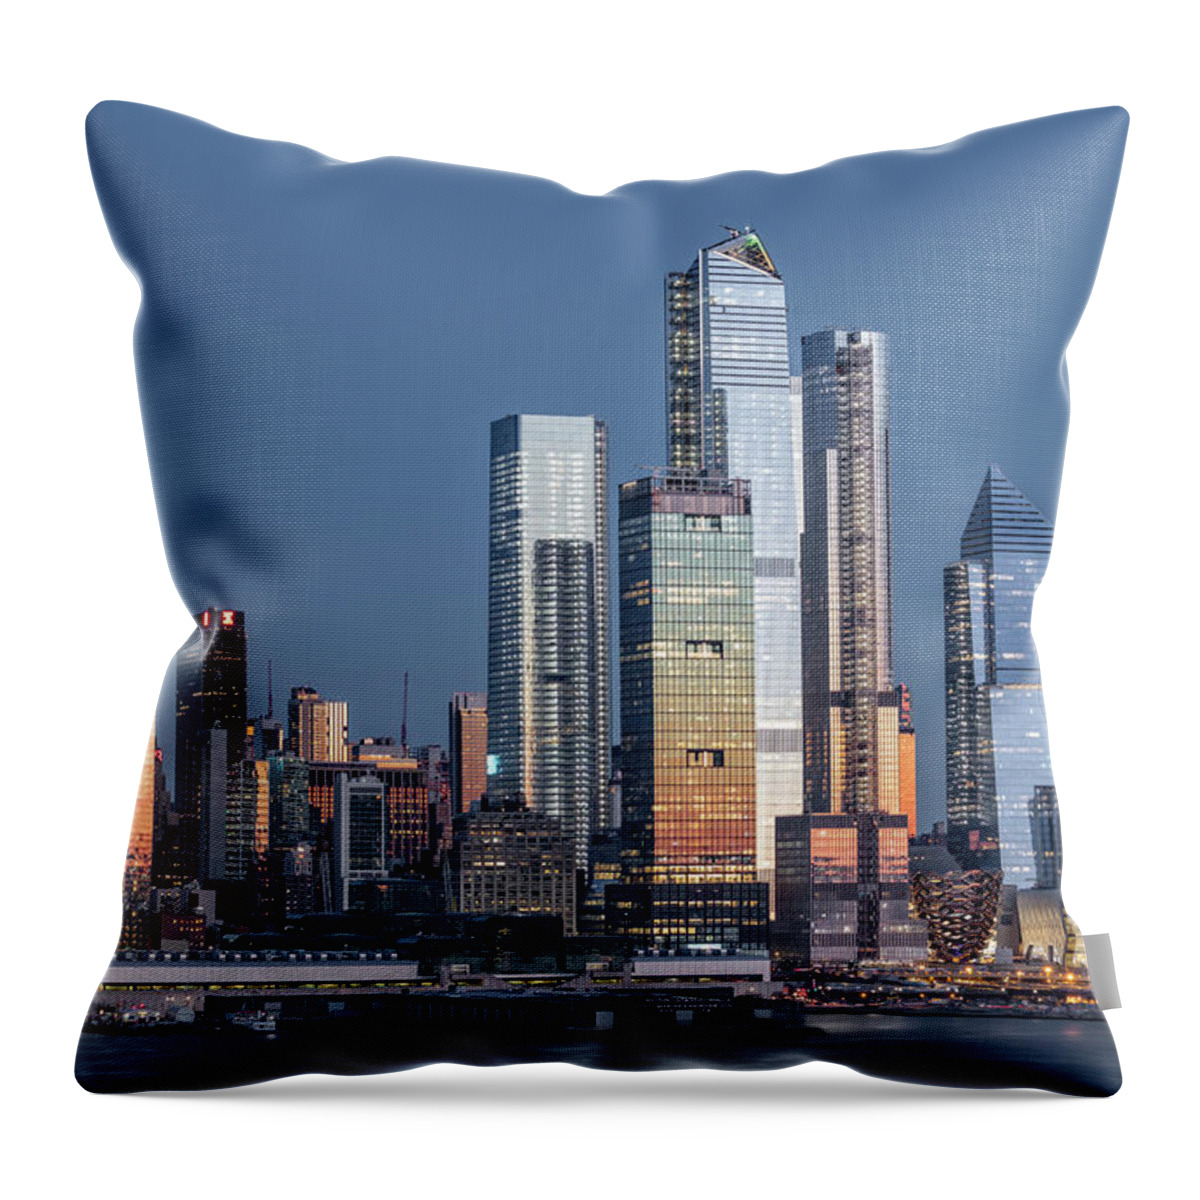 Nyc Skyline Throw Pillow featuring the photograph NYC Skyline Blue Hour #1 by Susan Candelario